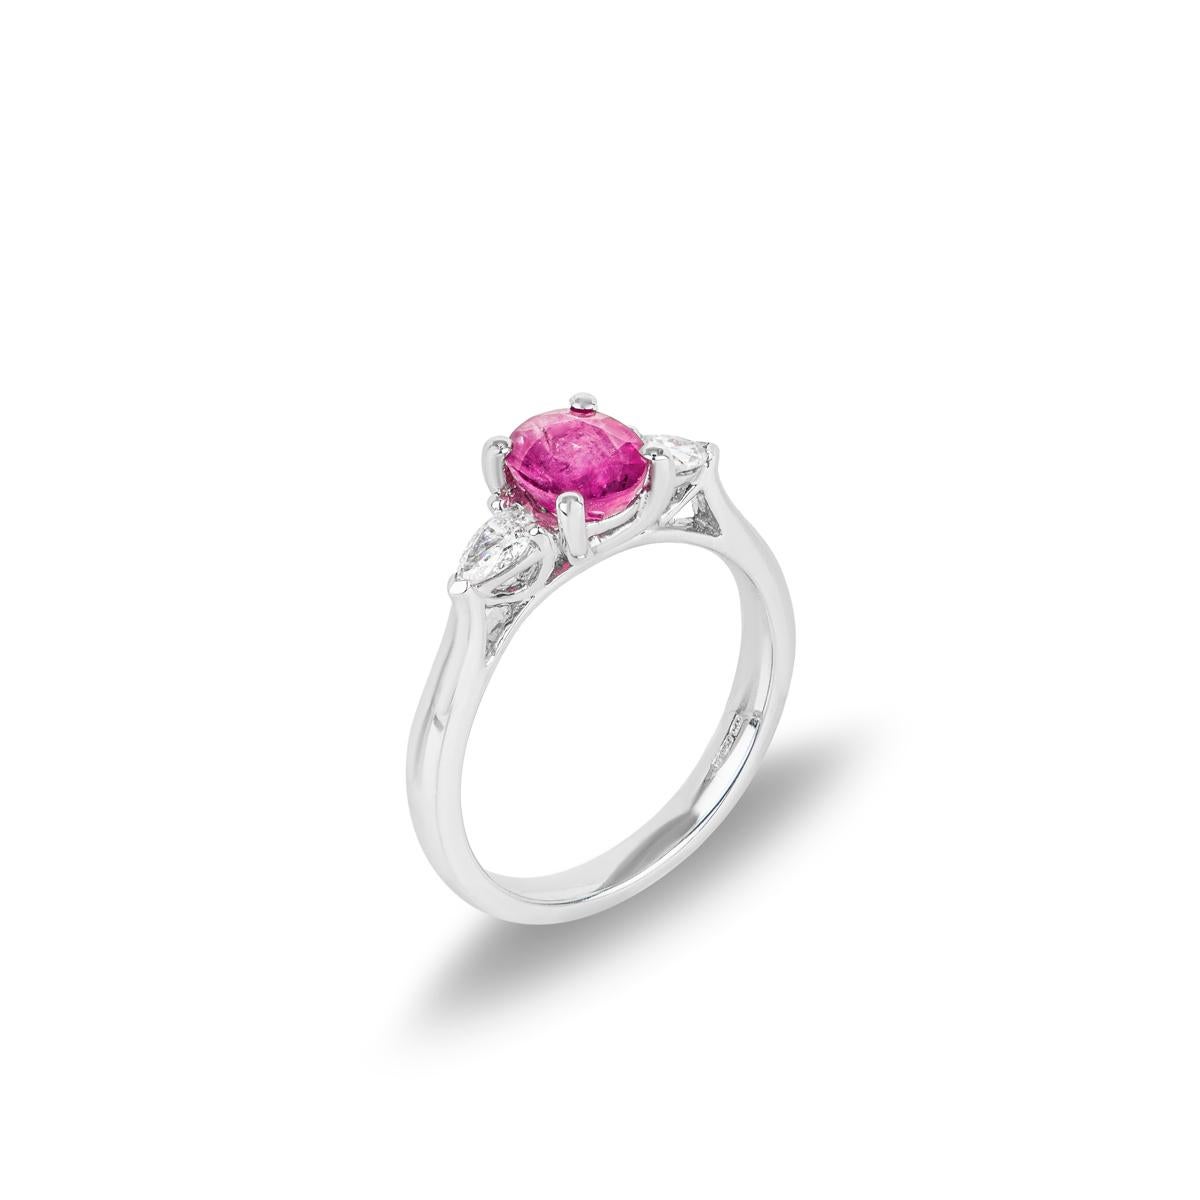 A classic 18k white gold ruby and diamond three stone ring. The ring features an oval cut ruby weighing 0.99ct set in a four claw mount. Further complementing the ruby are two pear cut diamonds set to either side with an approximate total weight of